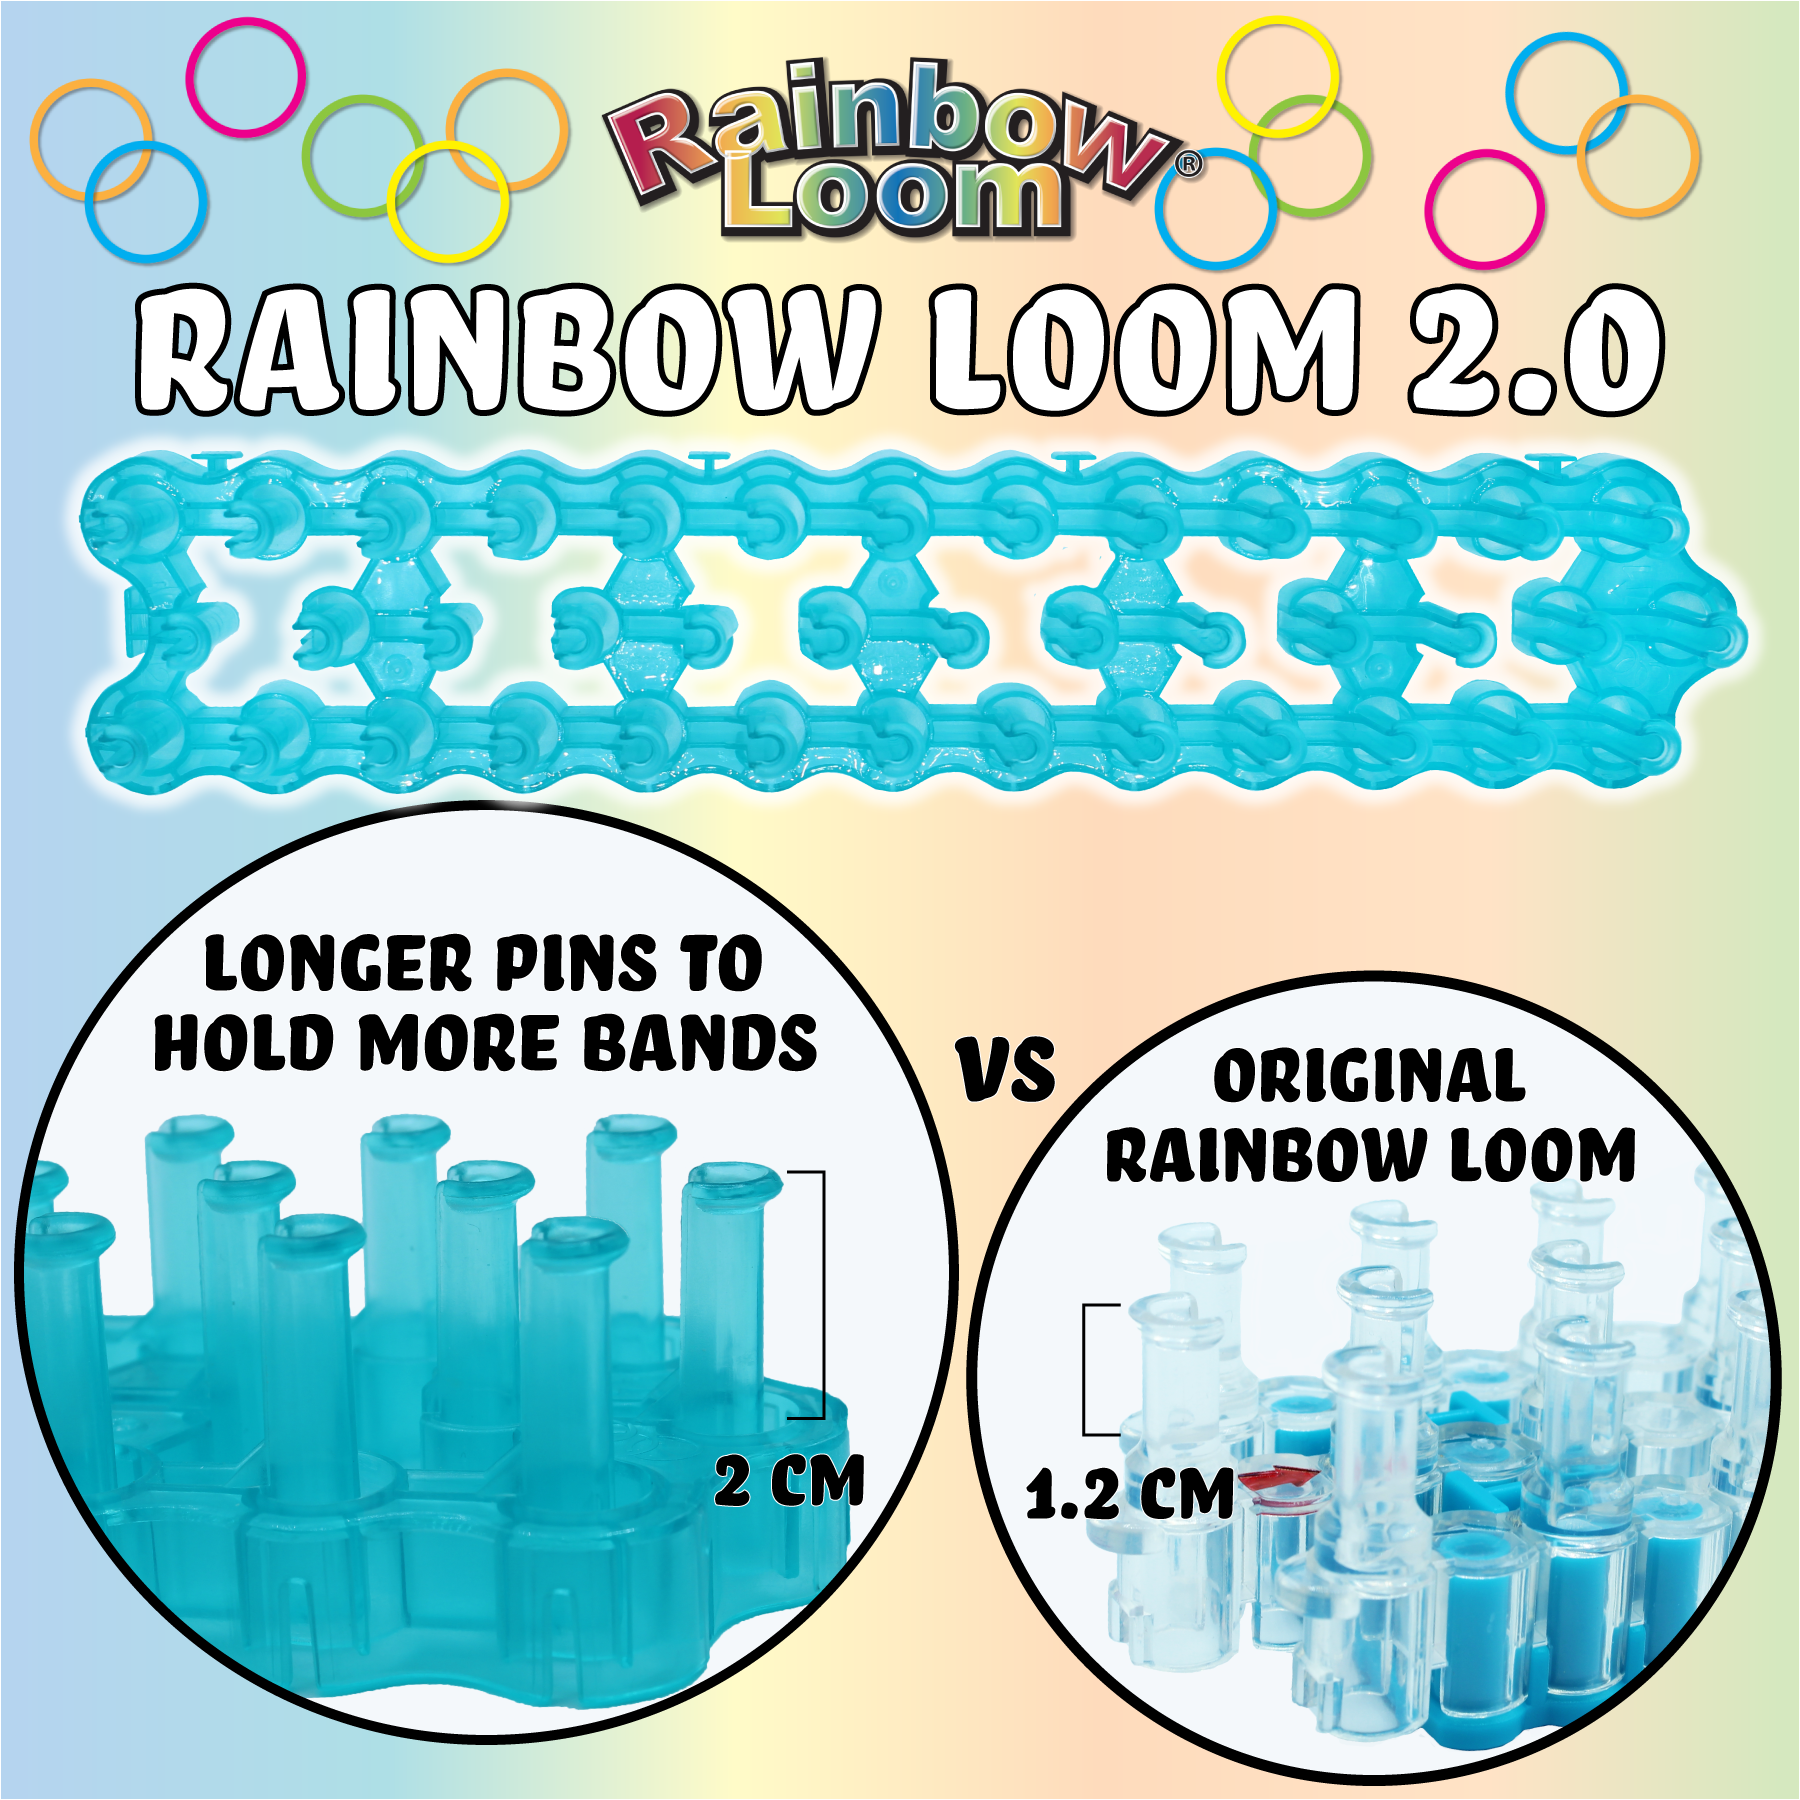  Rainbow Loom® Loomi-Pals Food Collectible, Features 30 Mystery  Cute Food Themed Charms and 600 Colorful Rubber Bands All in a RESEALABLE  Bag, Great Gifts for Boys and Girls 7+ : Toys